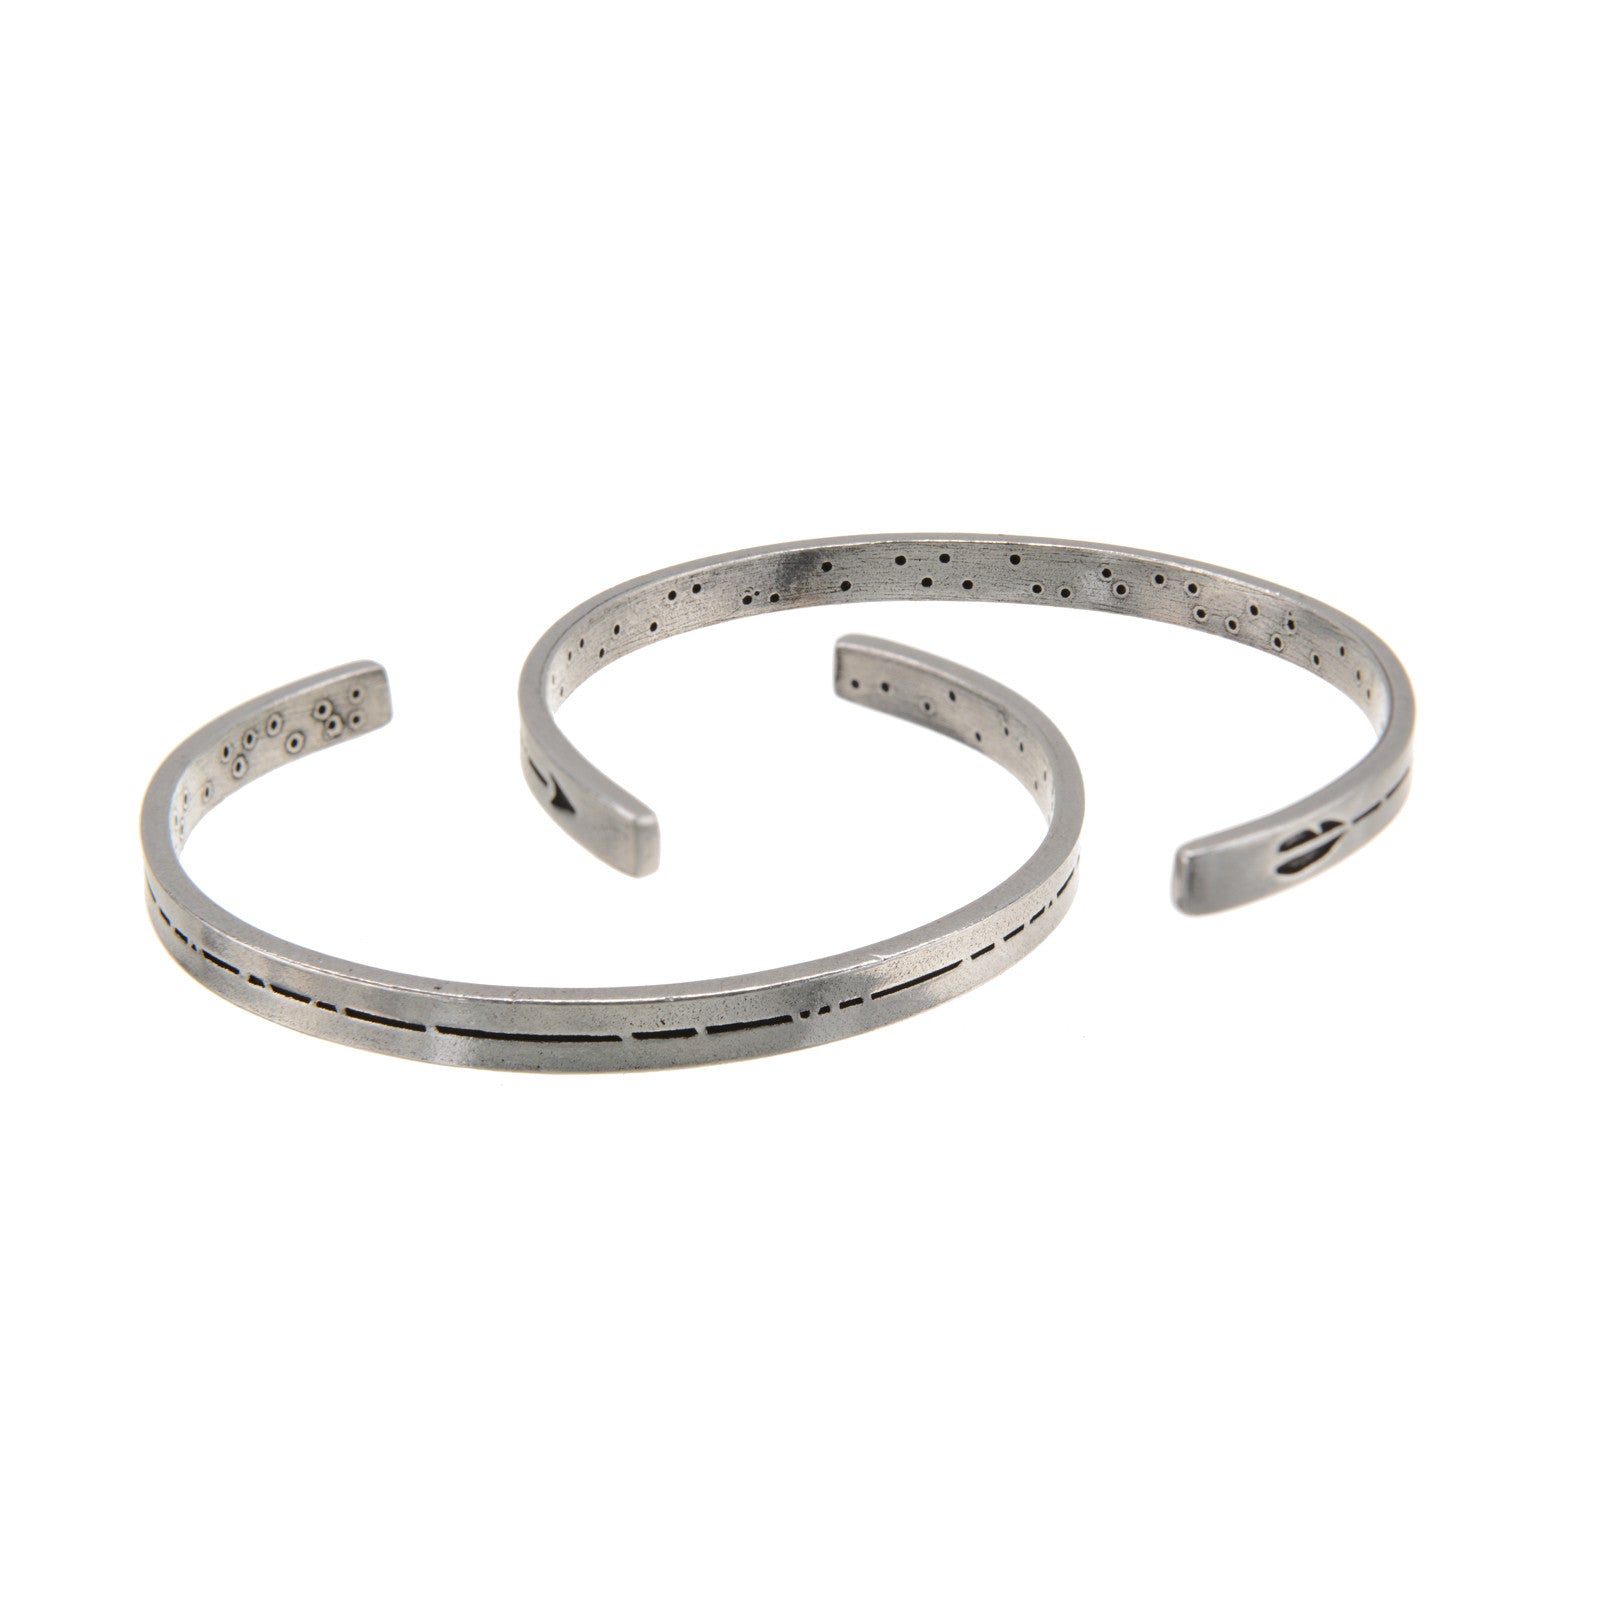 Mens Arrow Cuff Bracelet in Antiqued Stainless Steel – Day's Jewelers